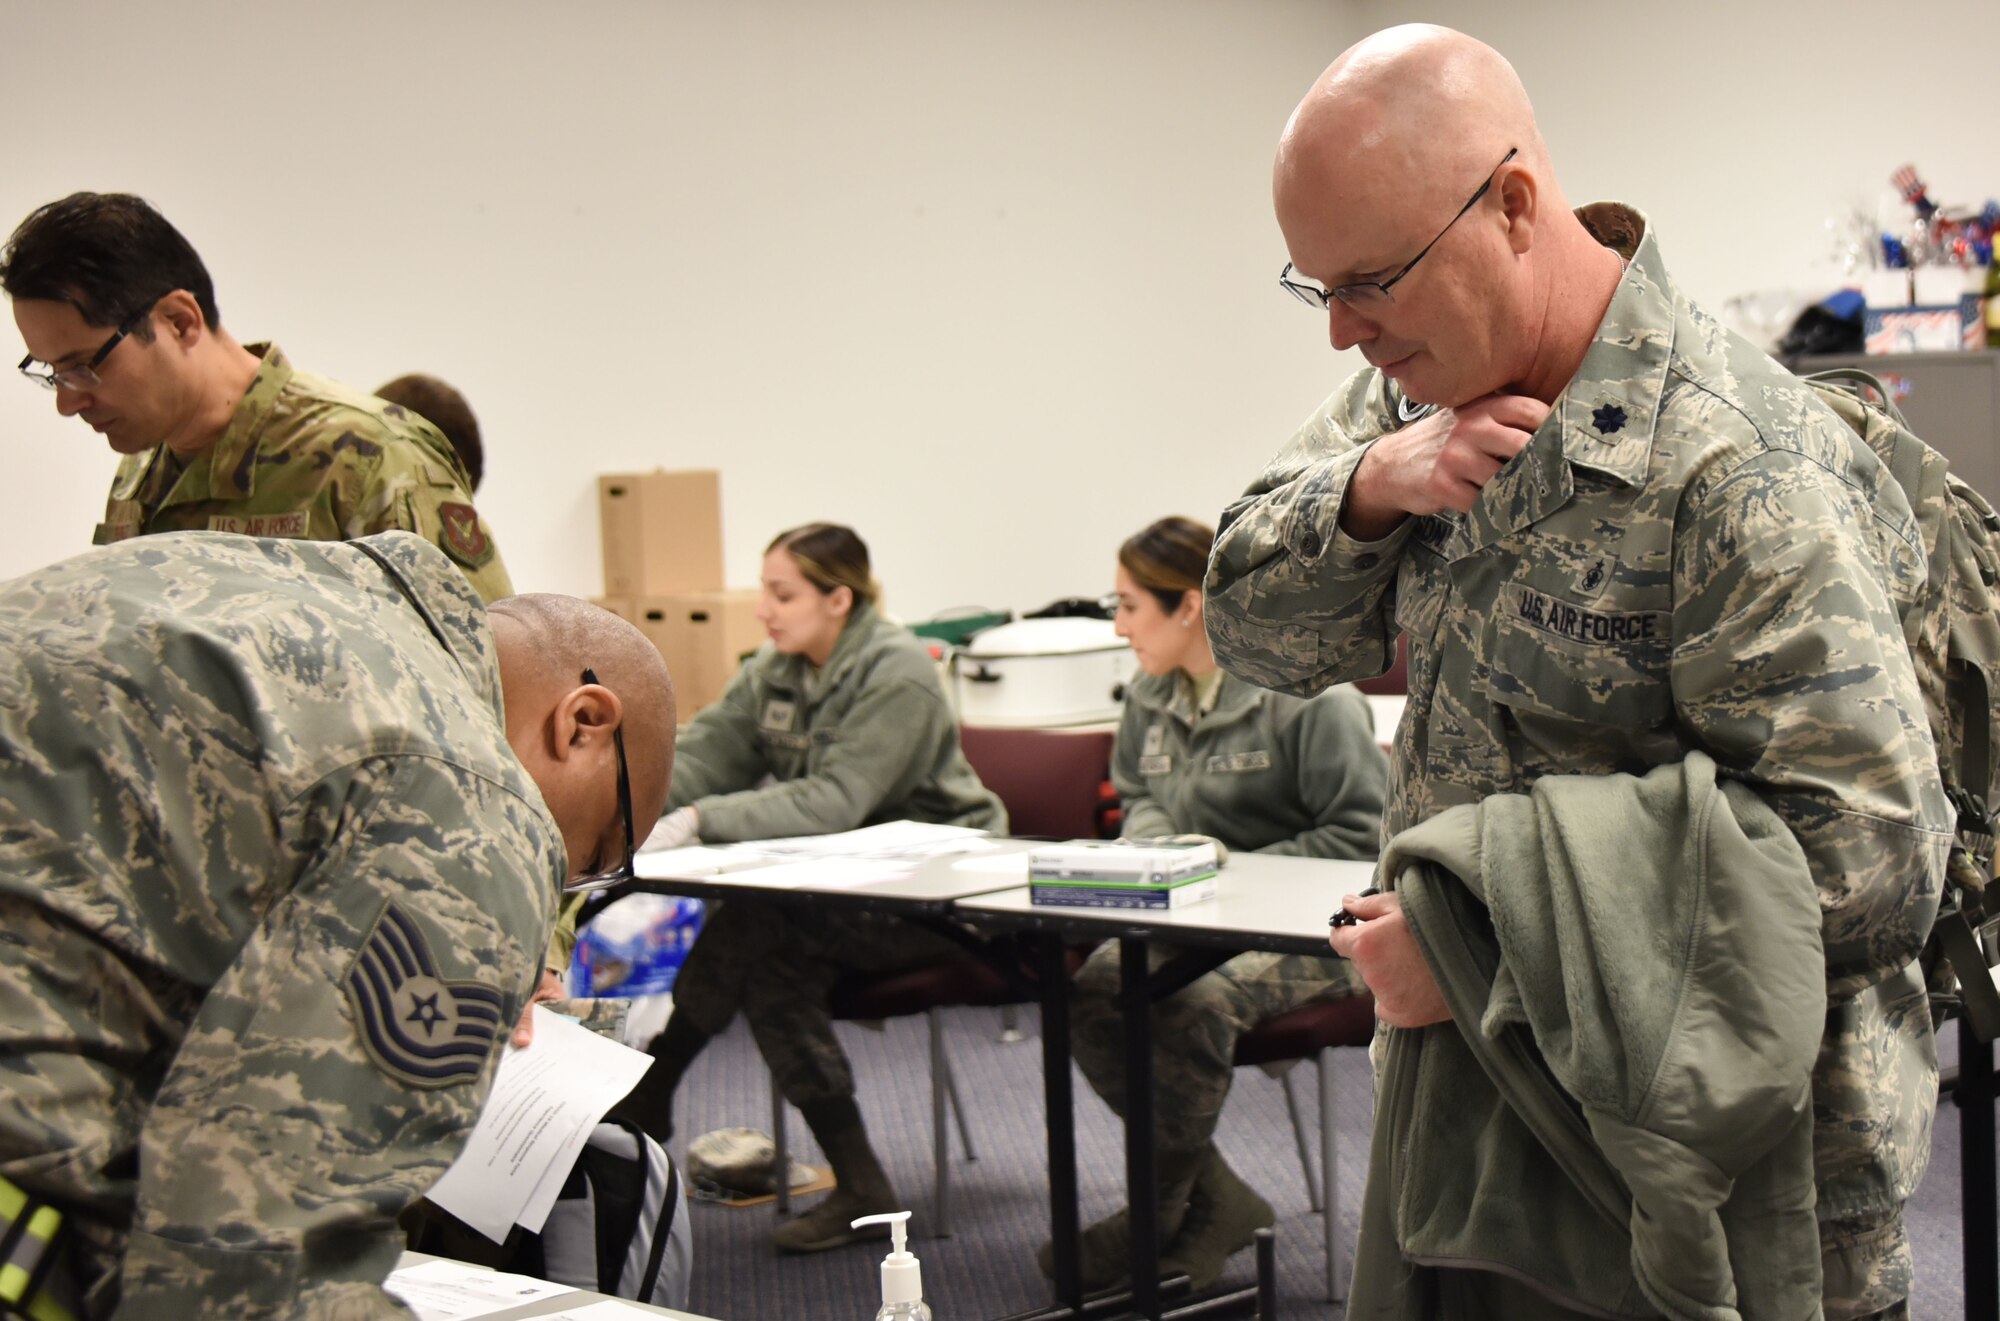 Deploying Airmen from the 301st Fighter Wing Medical Squadron process through a personnel deployment function (PDF) line at U.S. Naval Air Station Joint Reserve Base, Fort Worth, Texas on April 5, 2020. This deployment is part of a larger mobilization package of more than 120 doctors, nurses, and respiratory technicians Air Force Reserve units across the nation provided over the past 48 hours of COVID-19 response to take care of Americans. (U.S. Air Force photos by Capt. Jessica Gross and Tech. Sgt. Melissa Harvey)